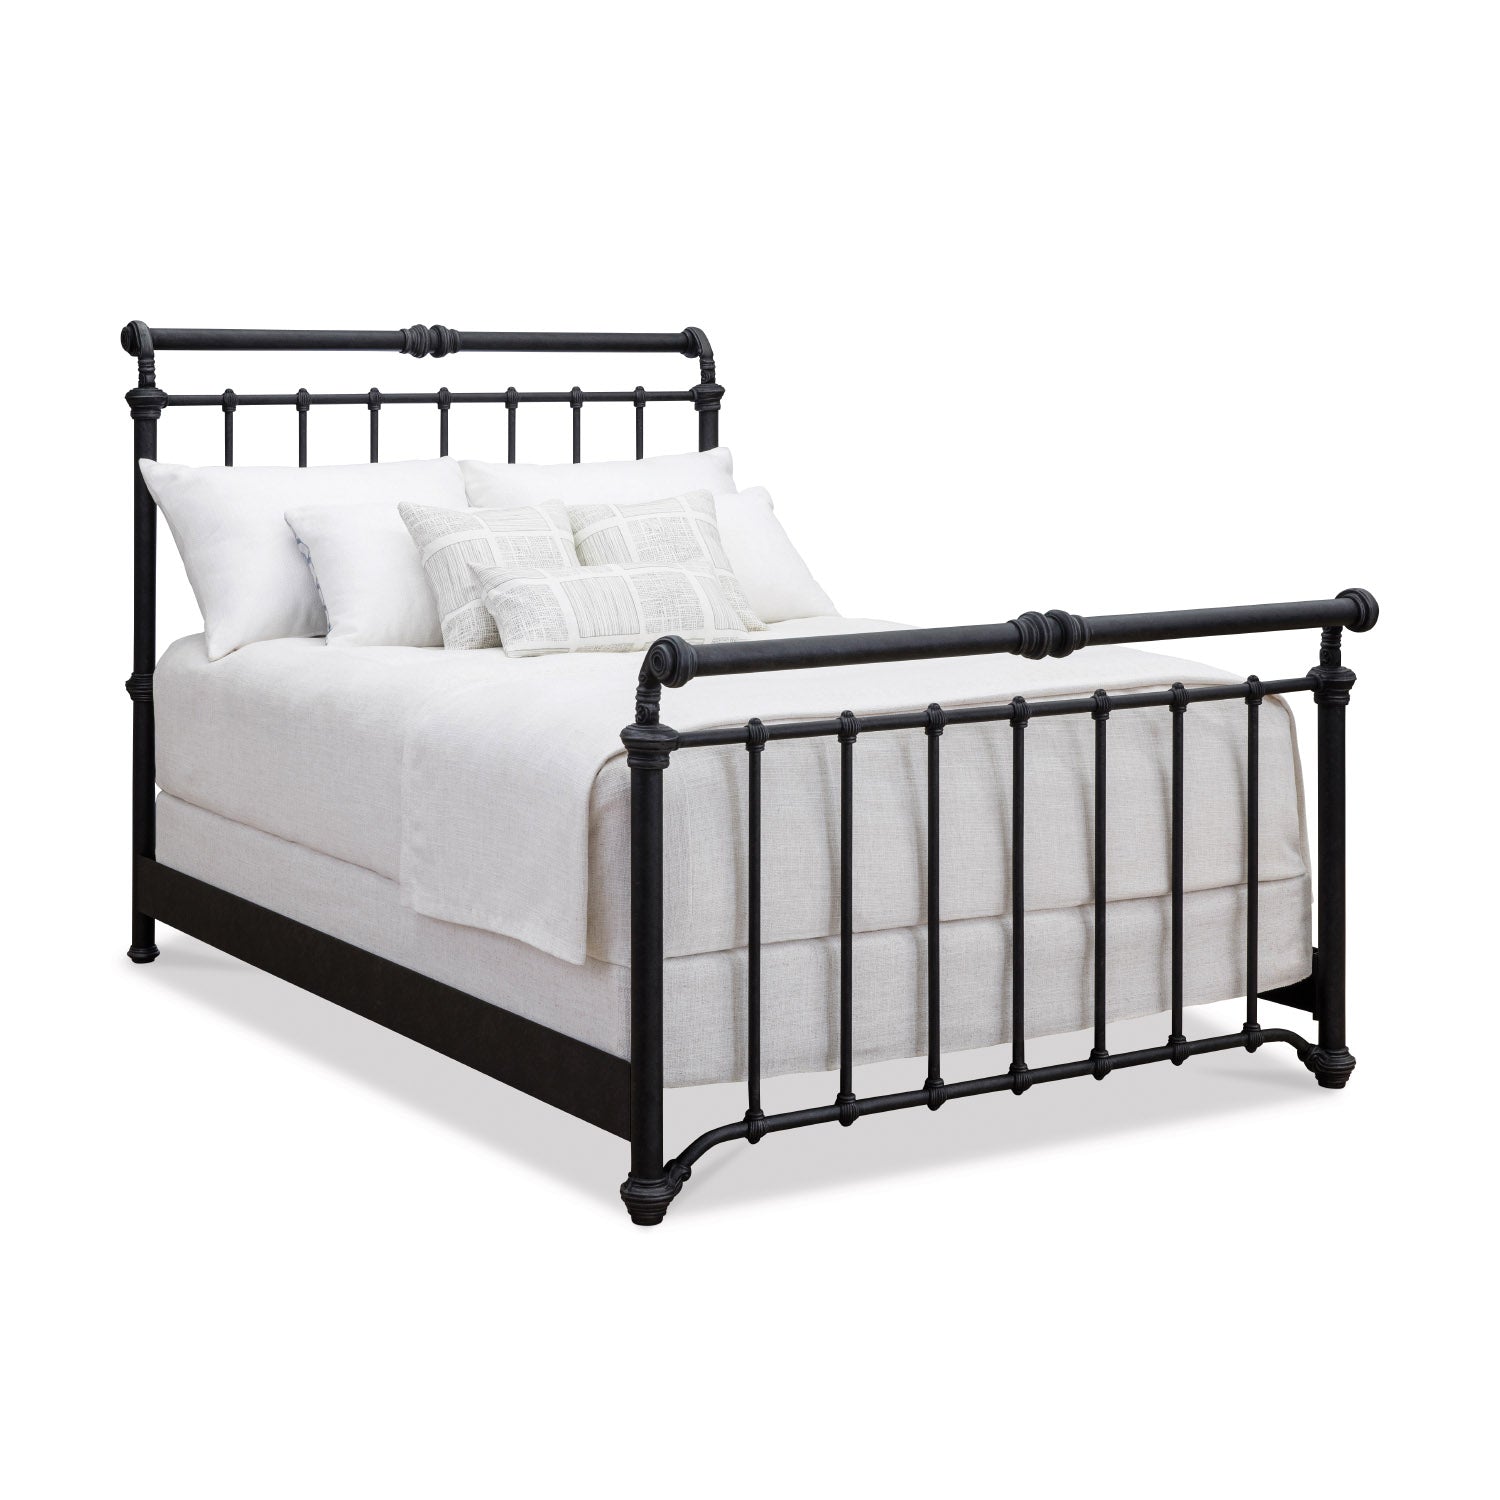 Sheffield Cast Iron Bed Frame